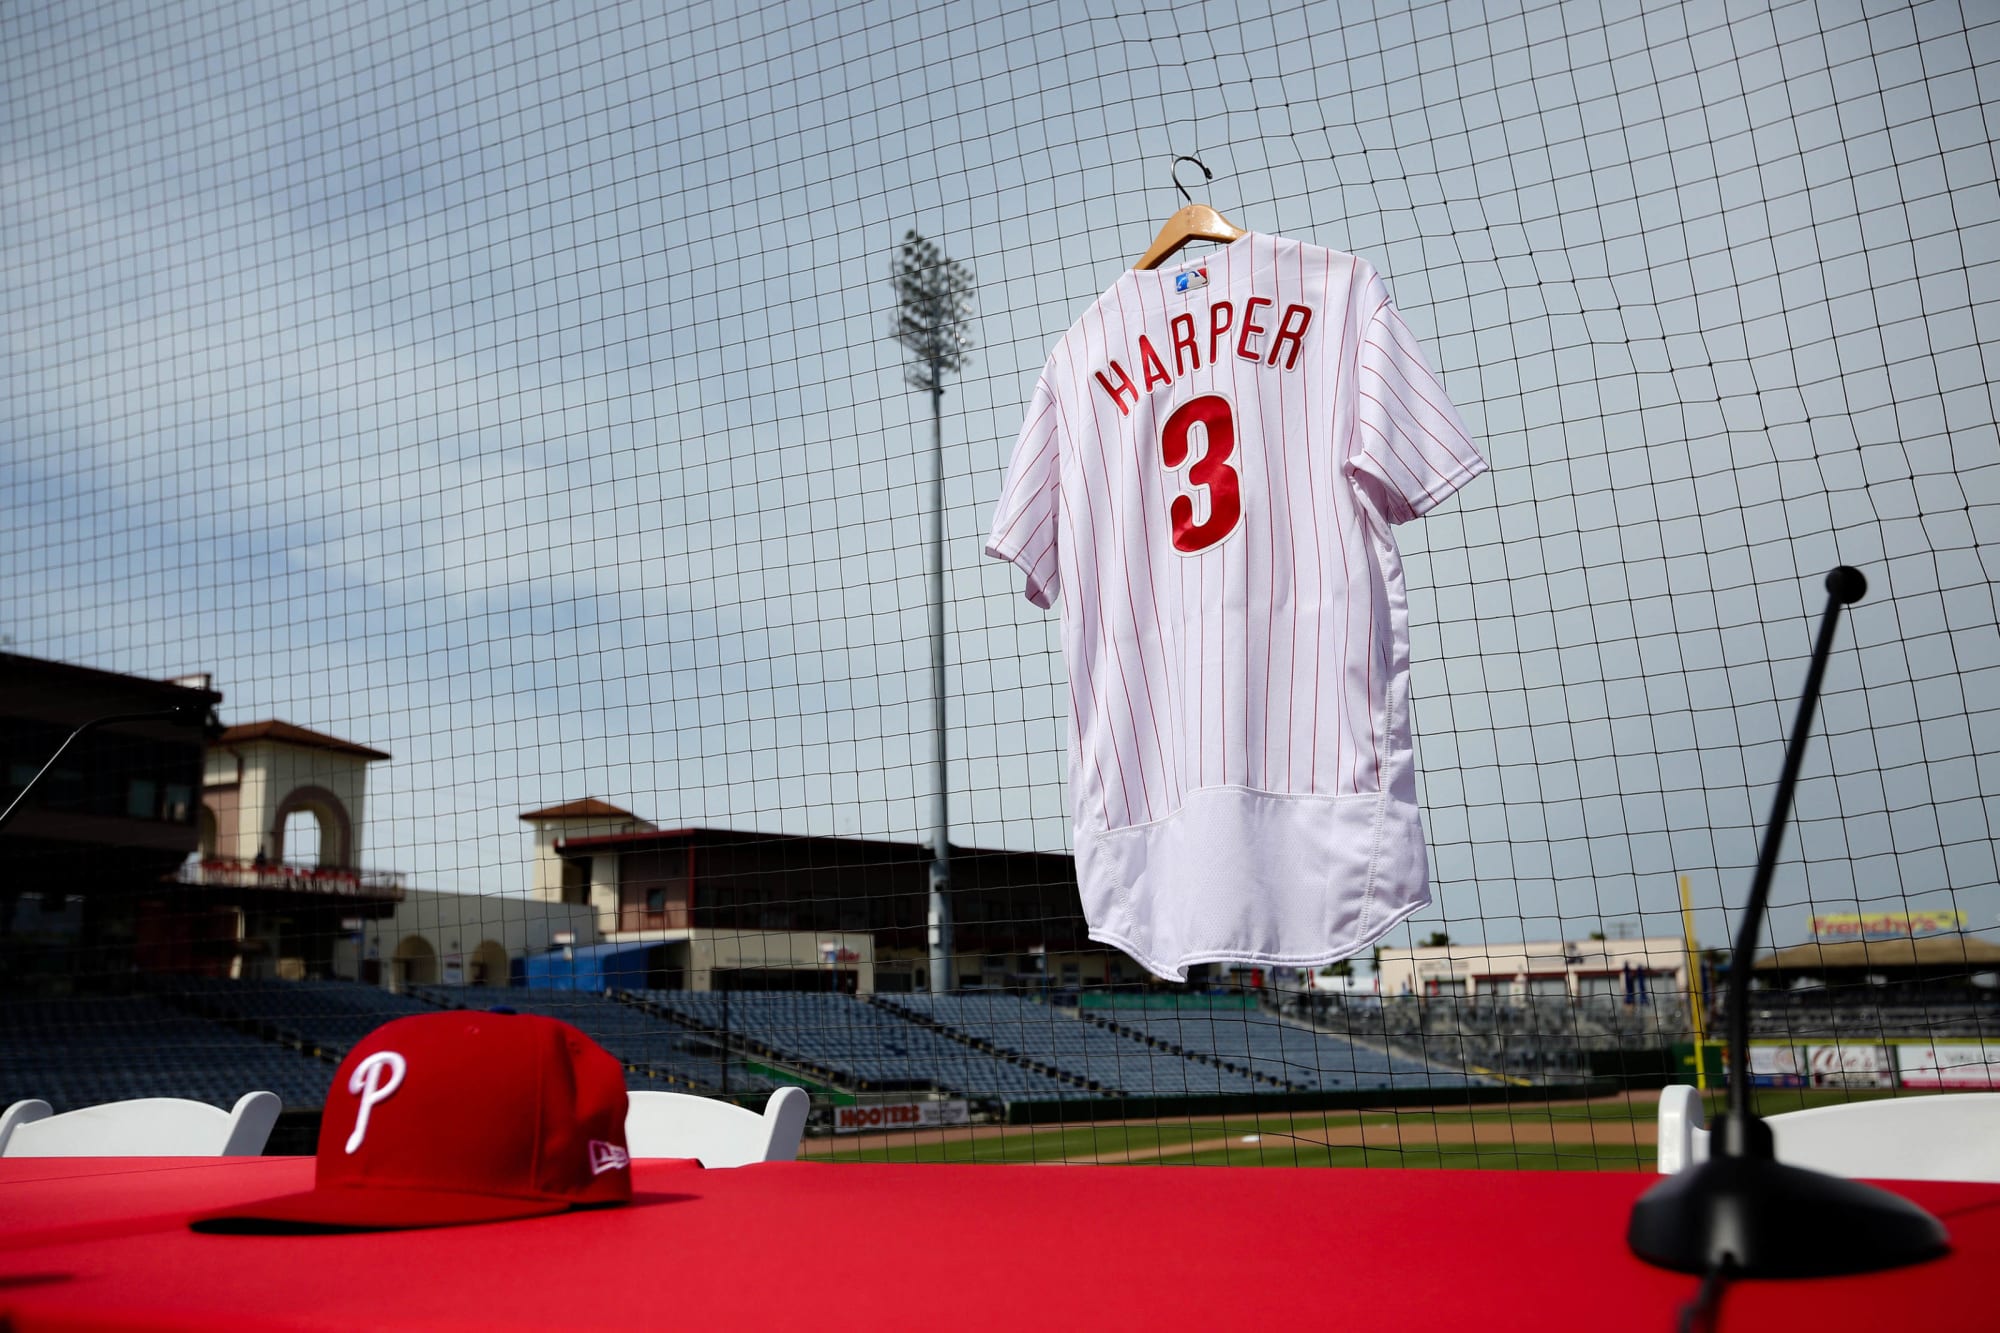 Phillies: Bryce Harper jersey 4th most popular in baseball - That Balls Outta Here